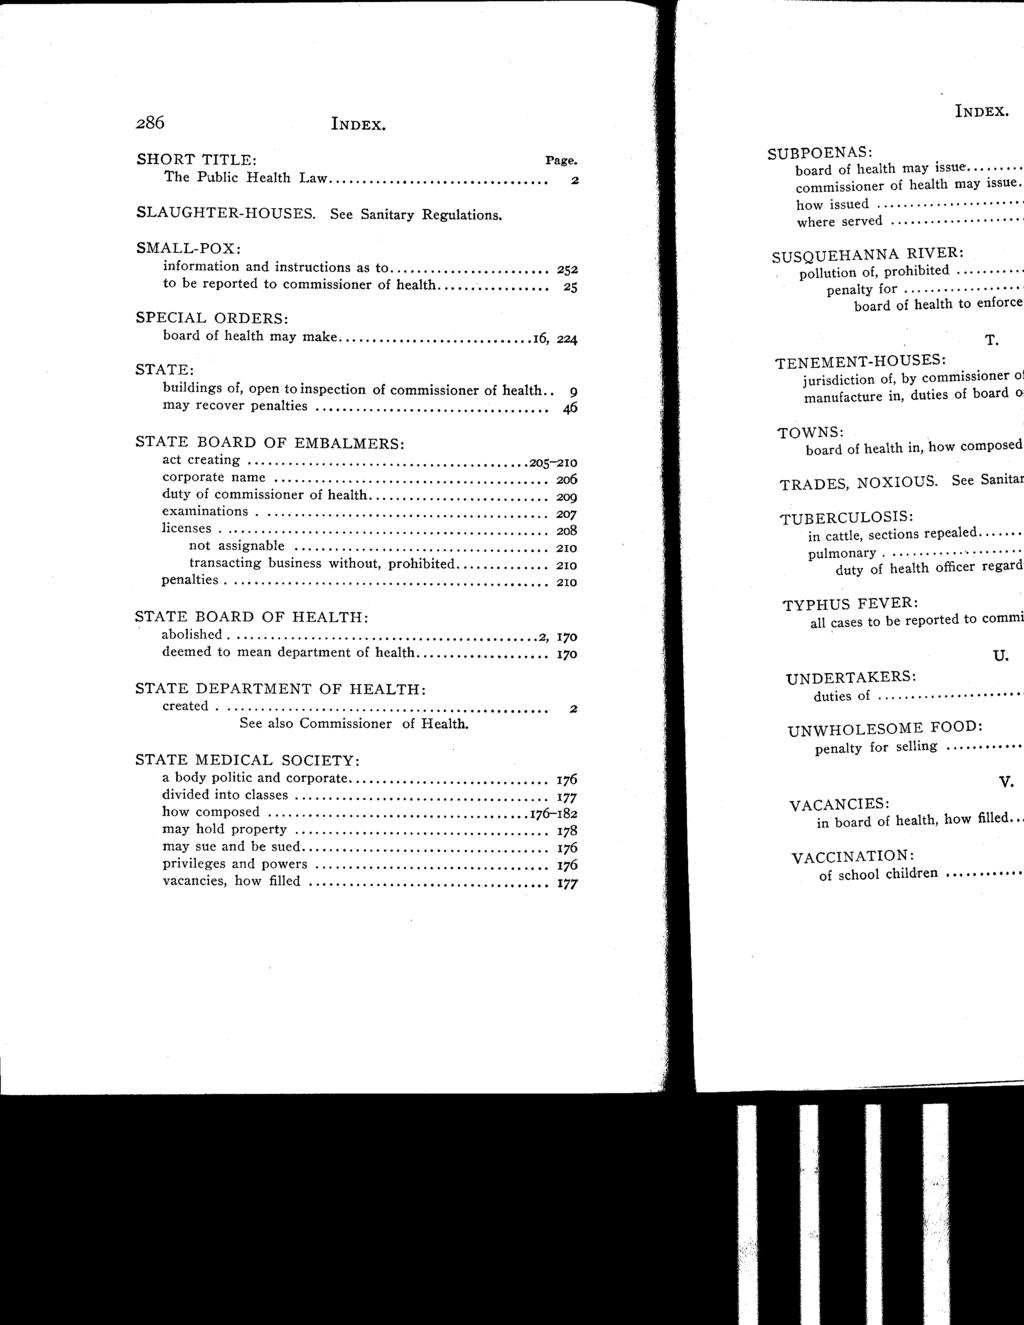 286 INDEX. SHORT TITLE : Page. The Public Health Law 2 SLAUGHTER-HOUSES. See Sanitary Regulations.